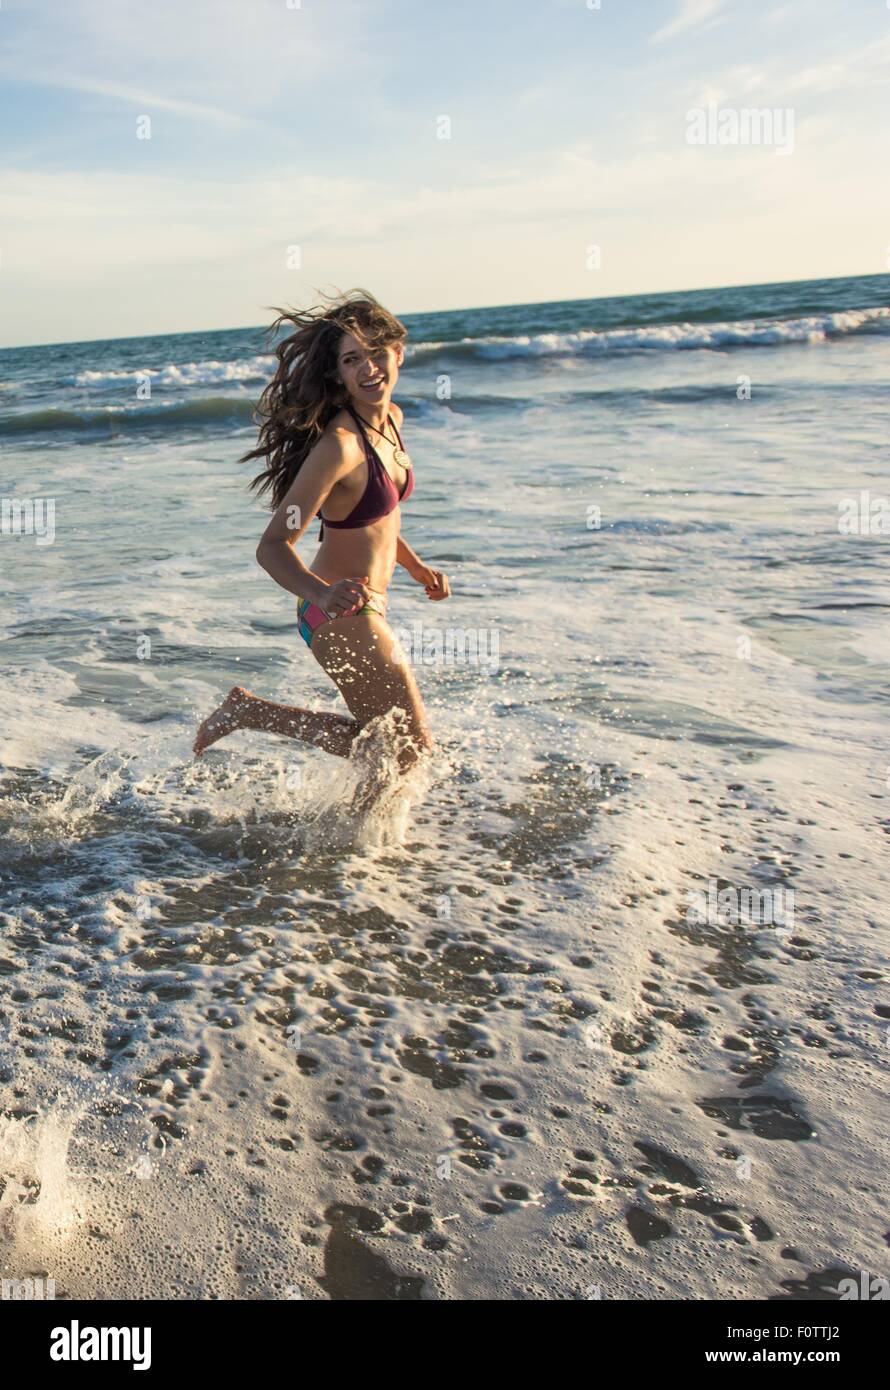 Young woman running in sea Stock Photo